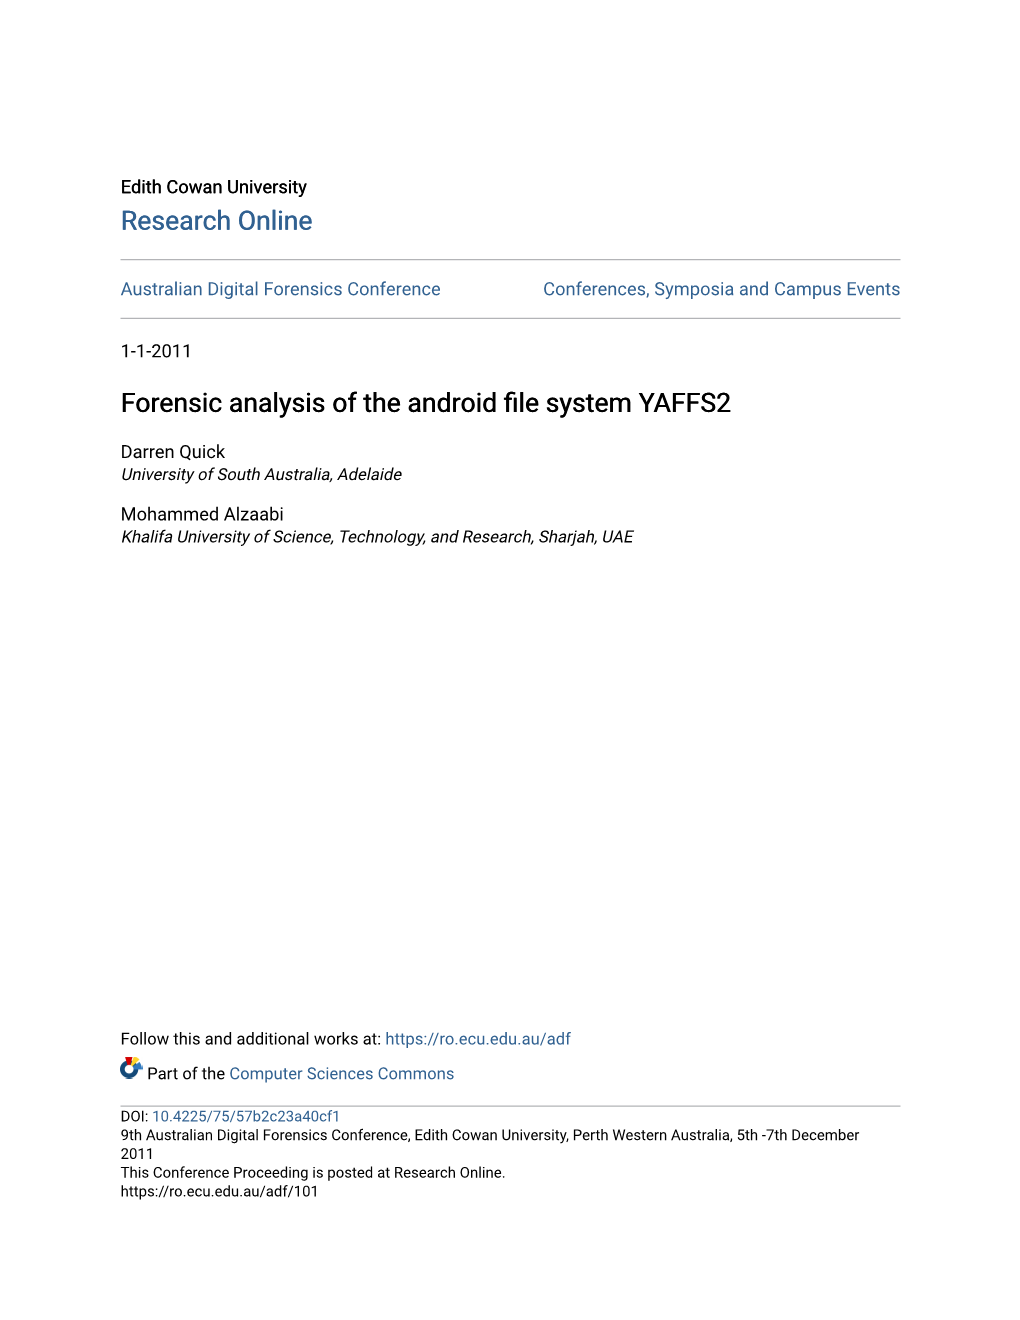 Forensic Analysis of the Android File System Yaffs2